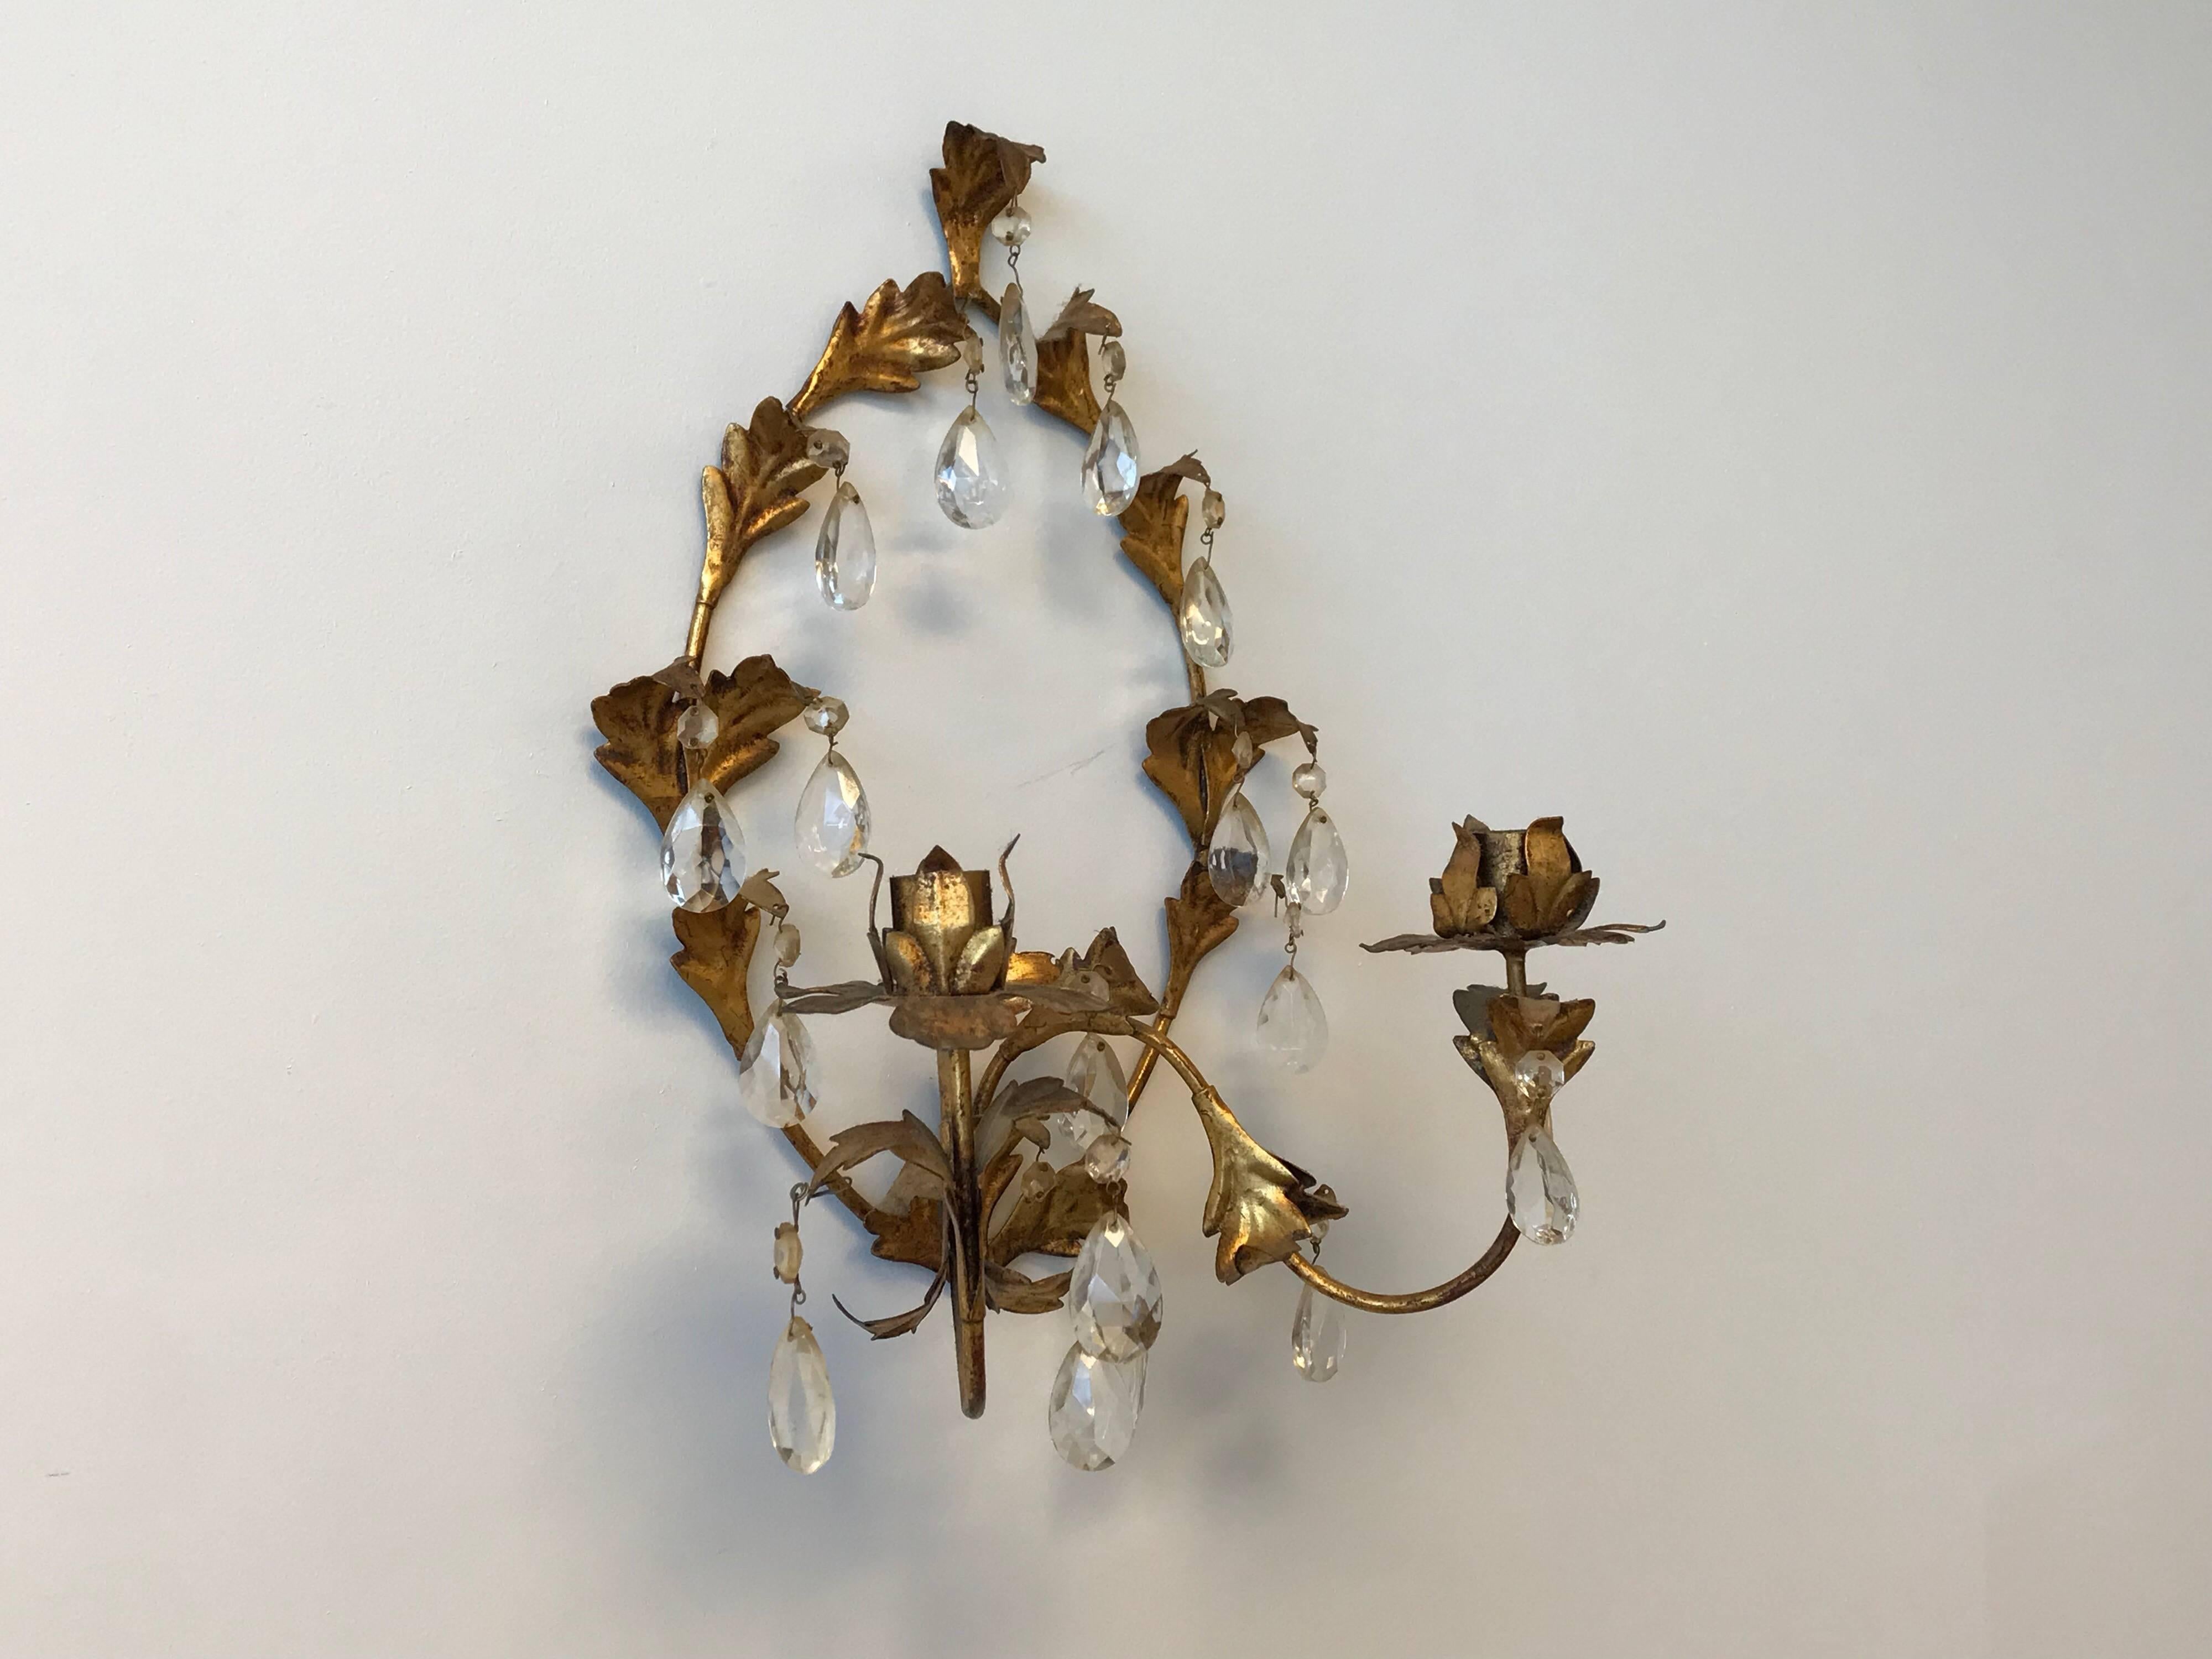 Listed is a beautiful, single, 1960s Italian Florentine gilded metal double-candlestick wall sconce. Missing some crystals, though can easily be replaced by buyer.